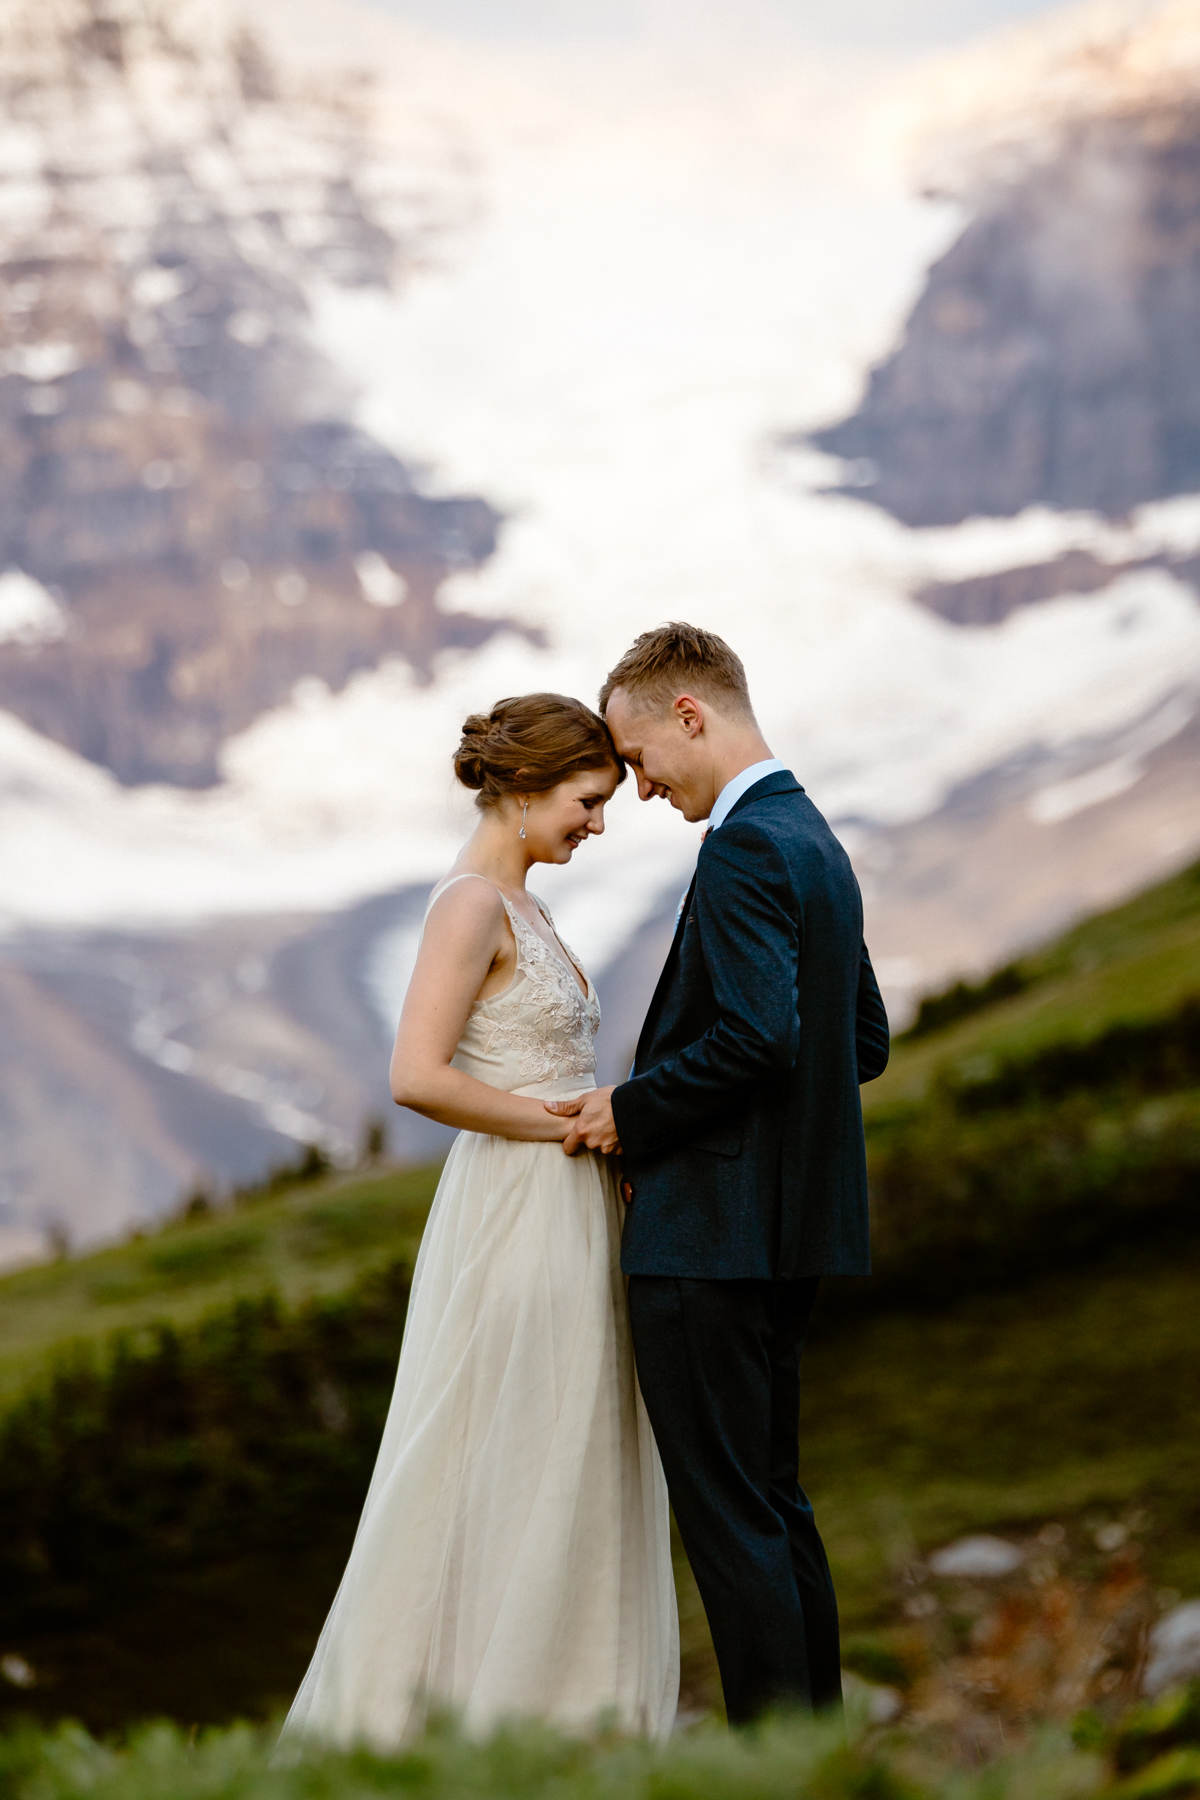 Hiking Elopement Photographers in Banff National Park - Photo 21